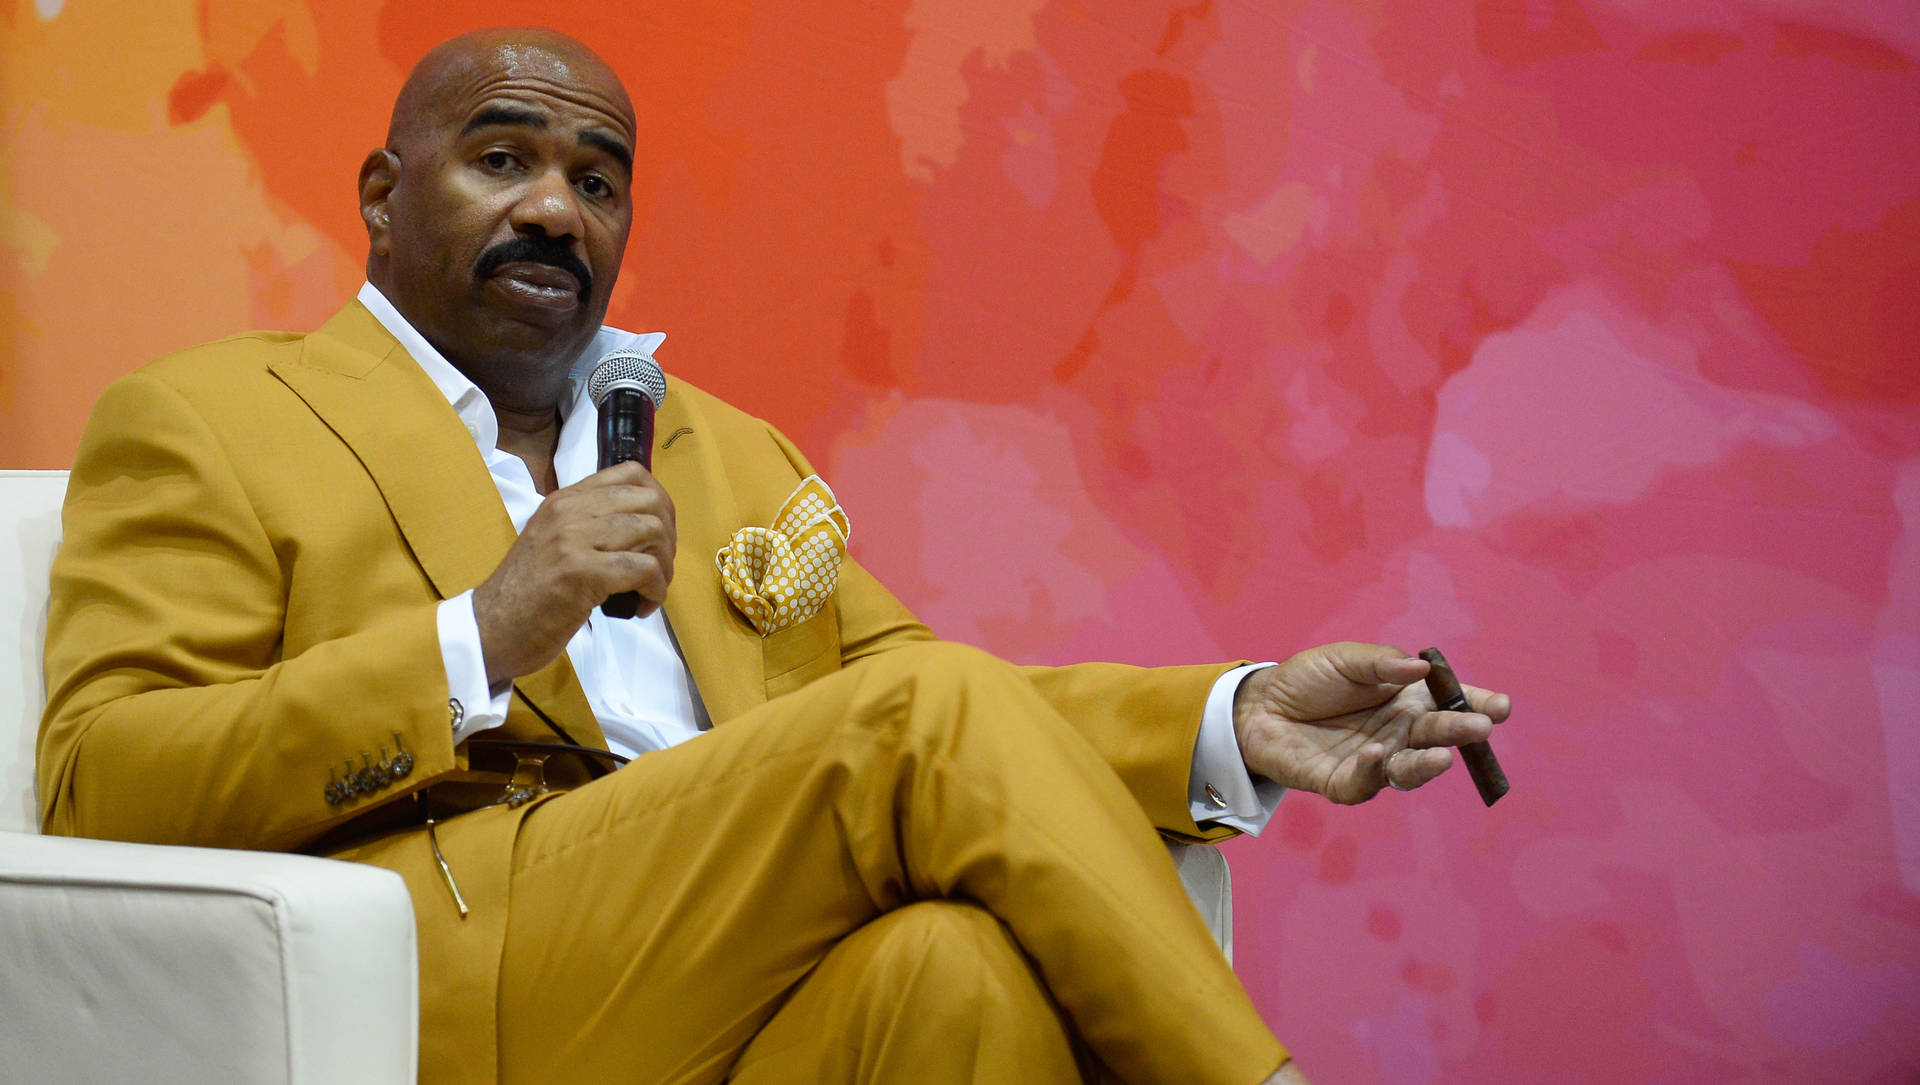 Steve Harvey In A Yellow Suit Background